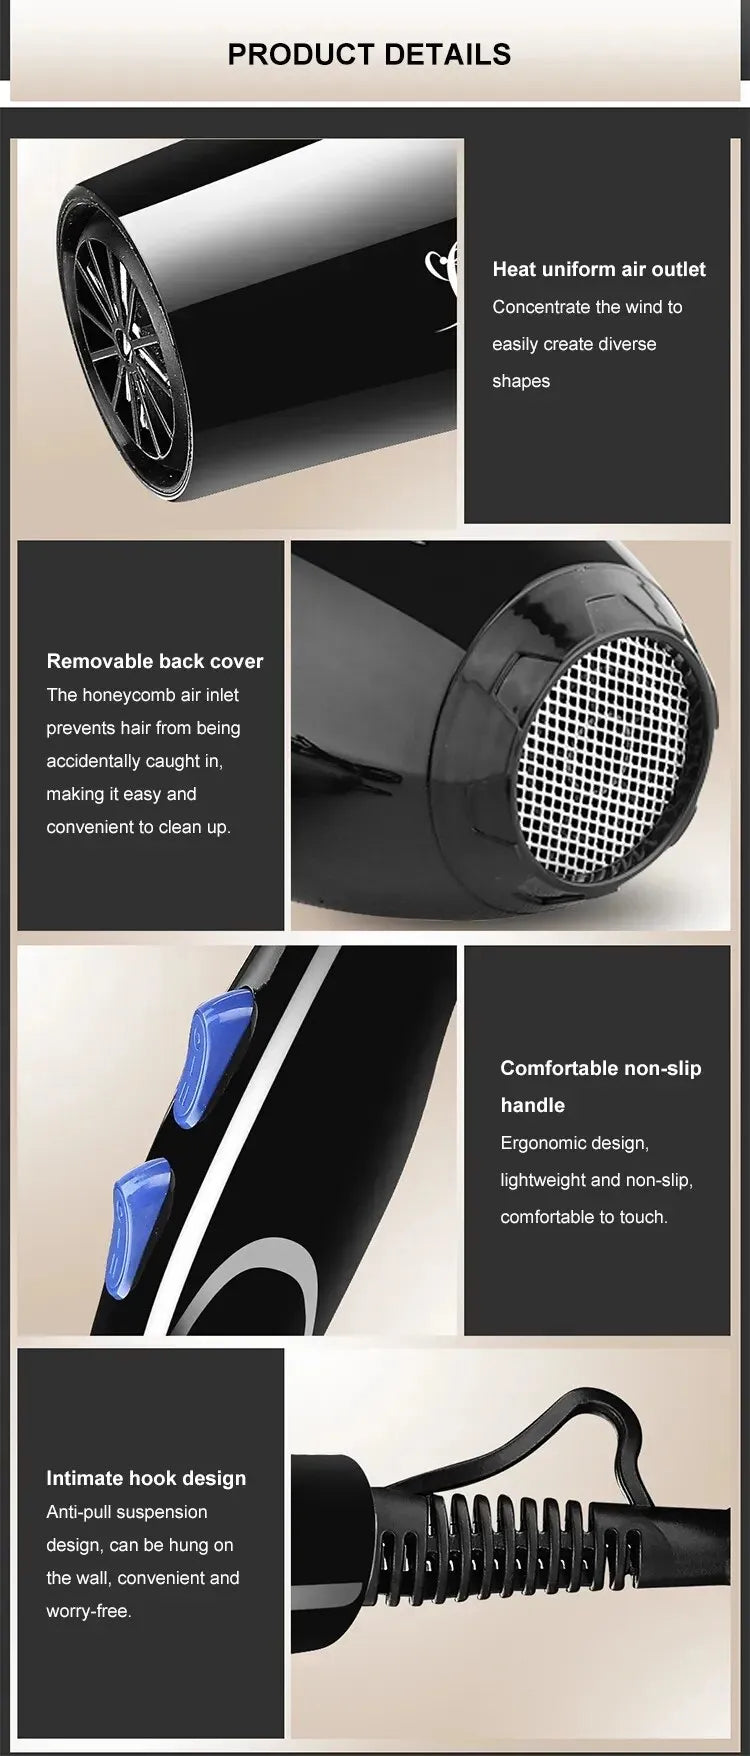 Negative ion hair dryer, constant temperature hair care without damaging hair, lightweight and portable, essential for home and travel